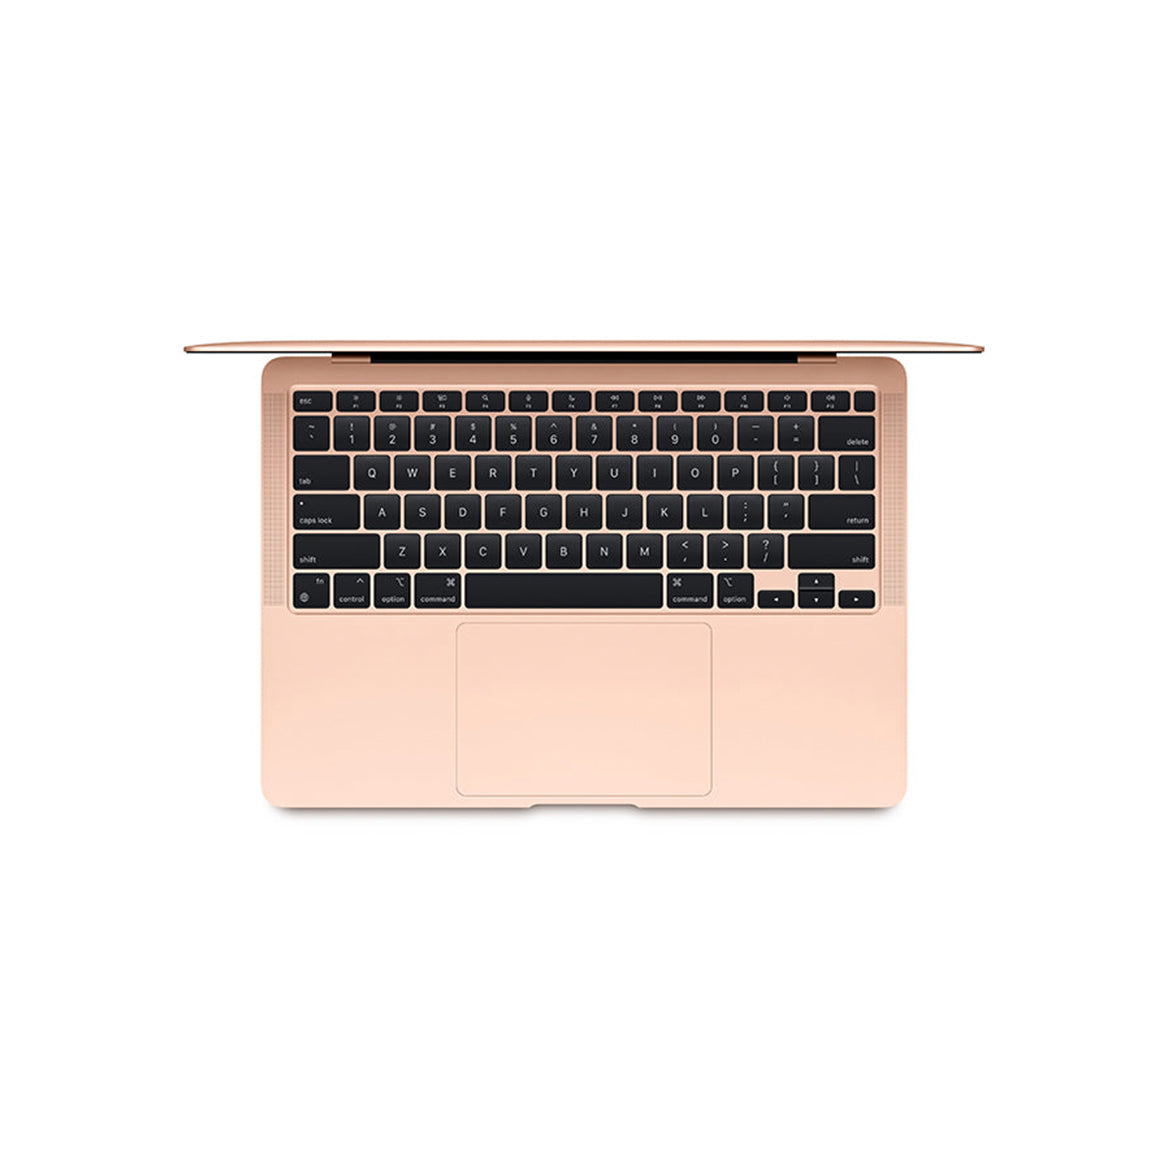 MacBook Air M1 2020 gold up side view